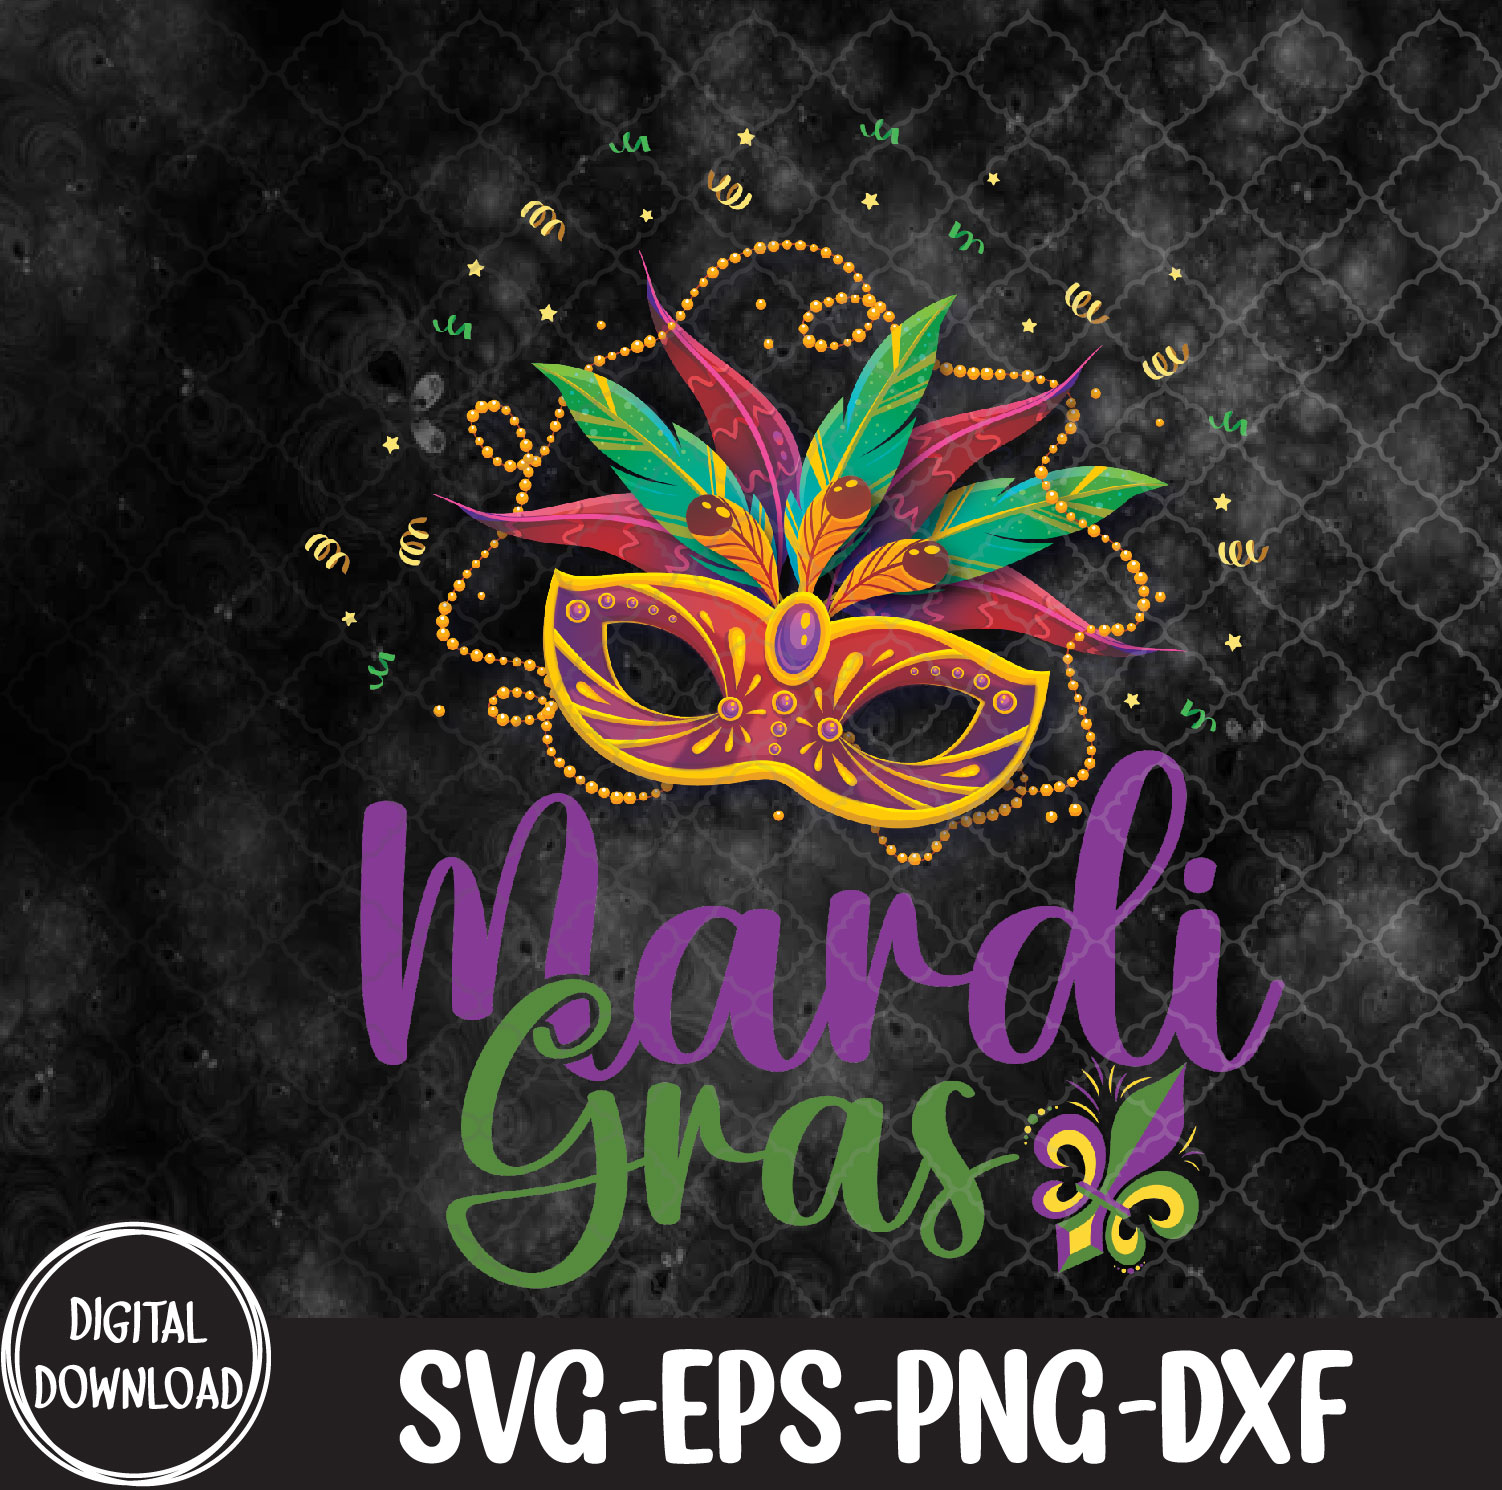 WTMNEW1512 09 27 Mardi Gras Beads Mask Feathers Hat, Mardi Gras svg, Svg, Eps, Png, Dxf